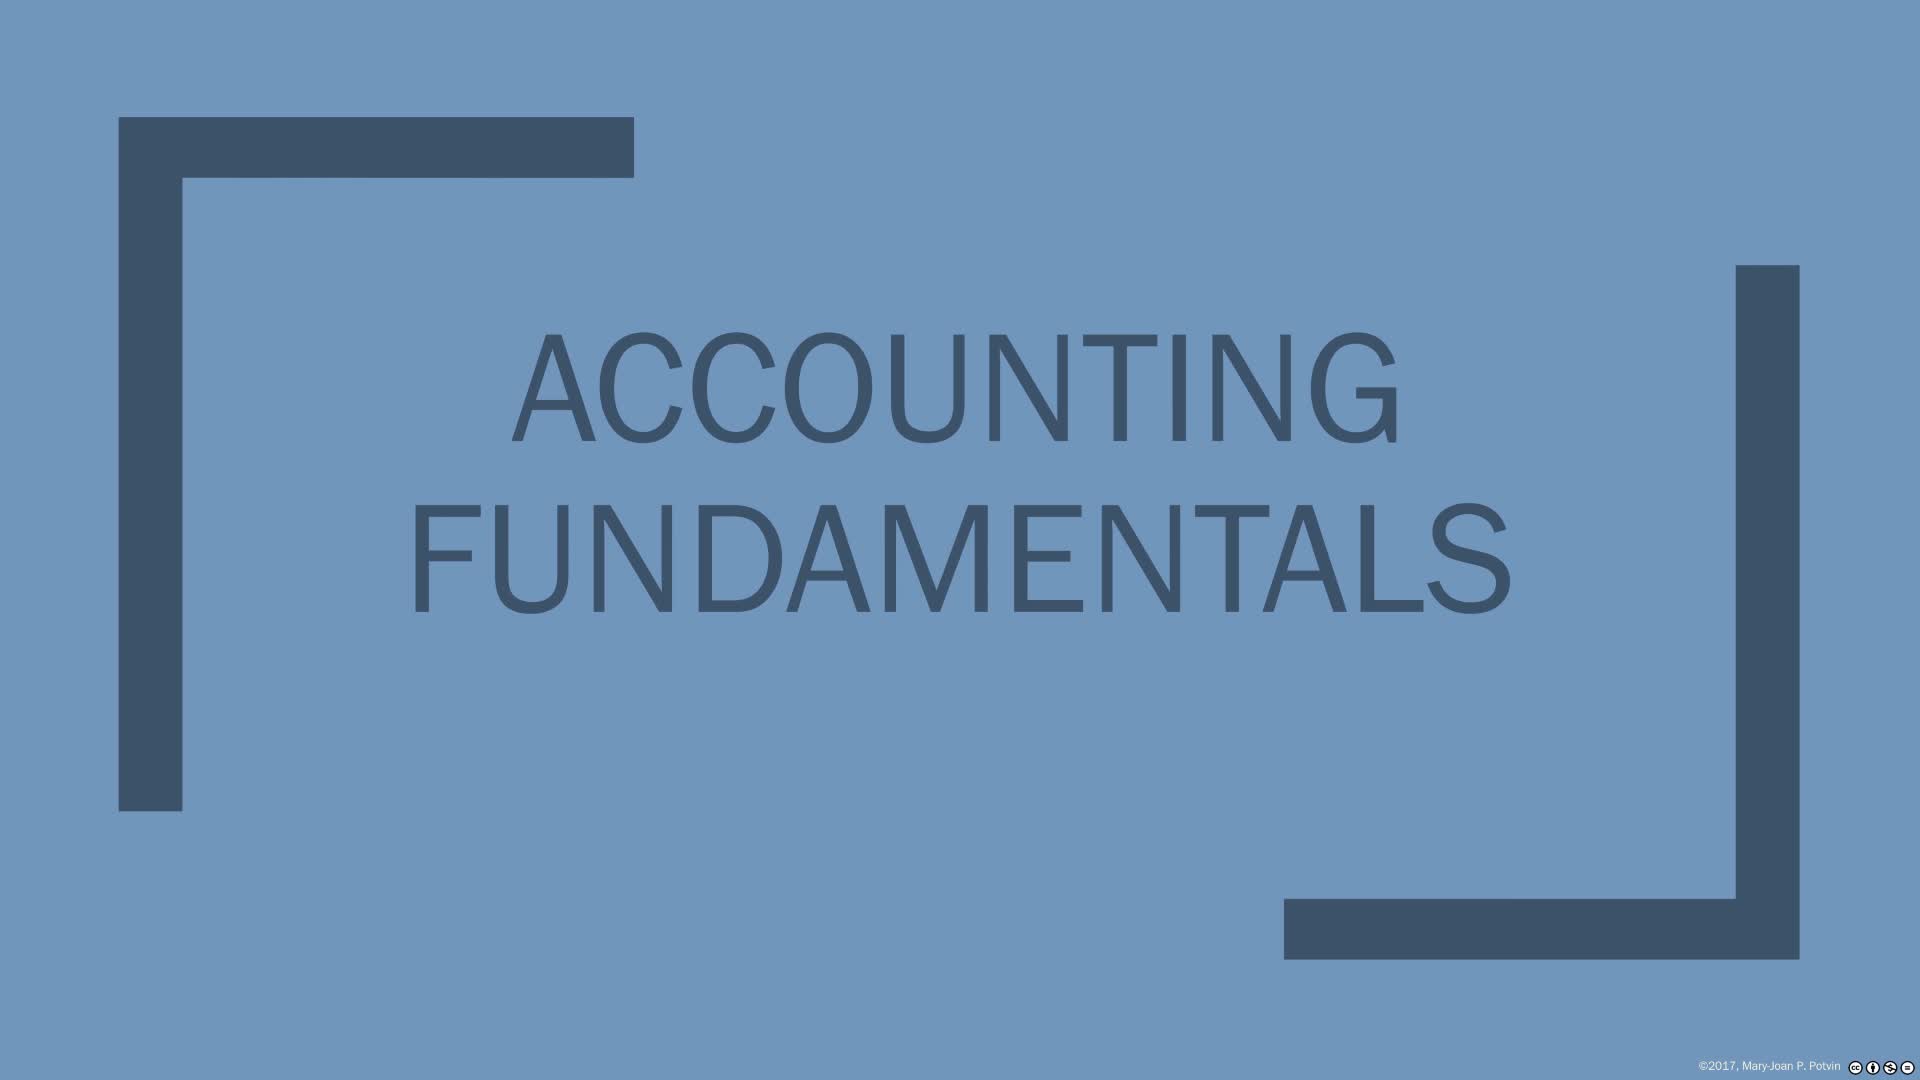 Financial Statement Overview